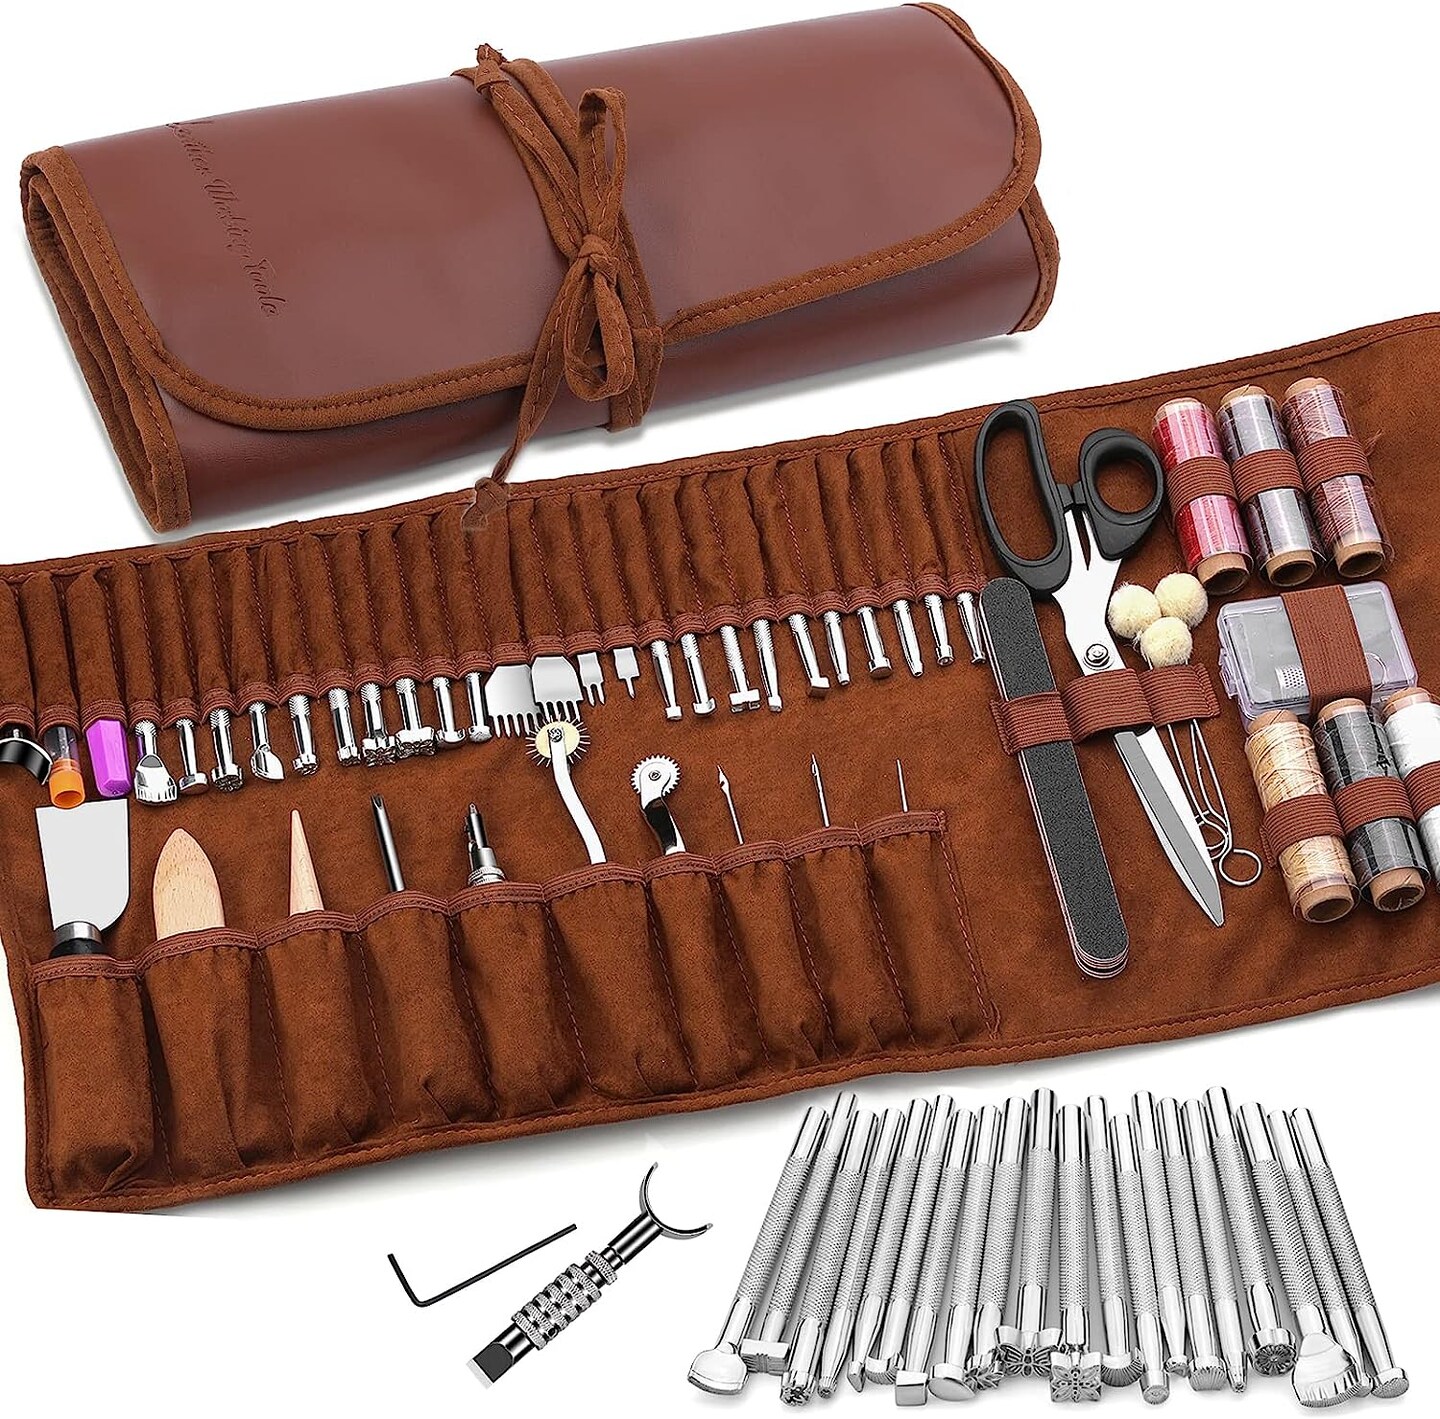 Leather Craft Tools Leather Working Tools Kit with Custom Storage Bag Leather Carving Tools Leather Craft Making for Cutting Punching Sewing Carving Stamping Leather Tooling Kit